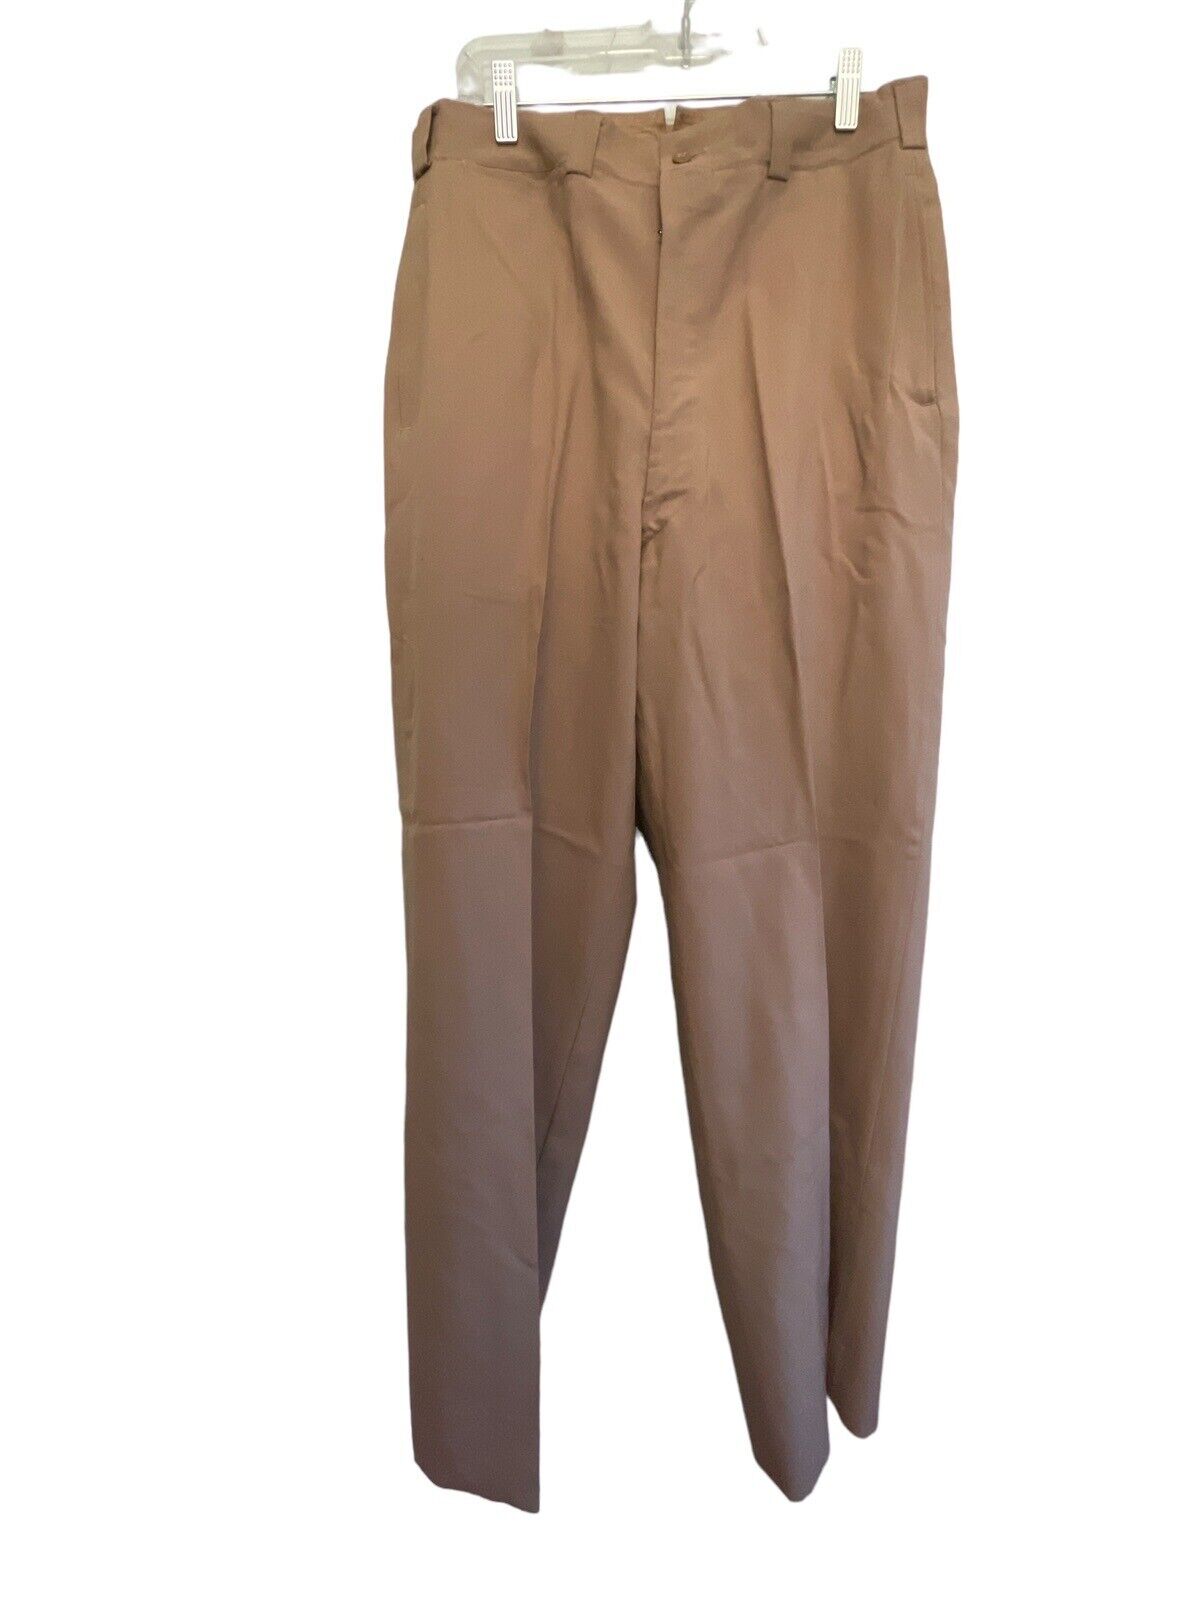 1940s WWII US Army Issued Officer Khaki Field Trousers